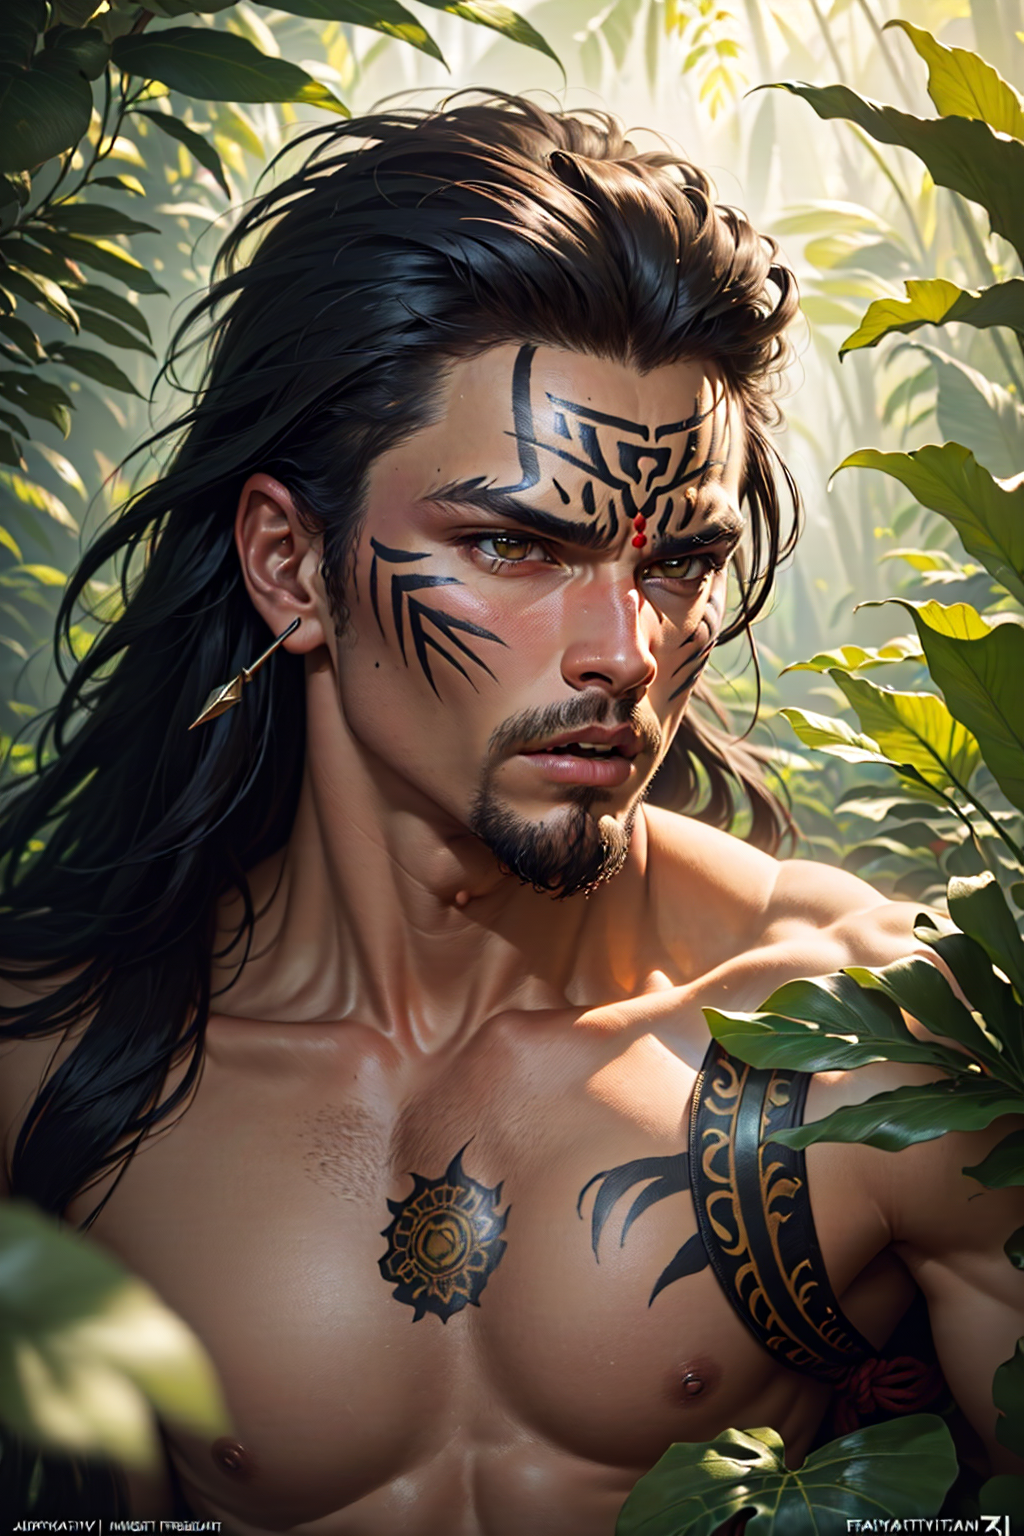 A Shirtless Man with Black Hair and Tattoos in a Forest.